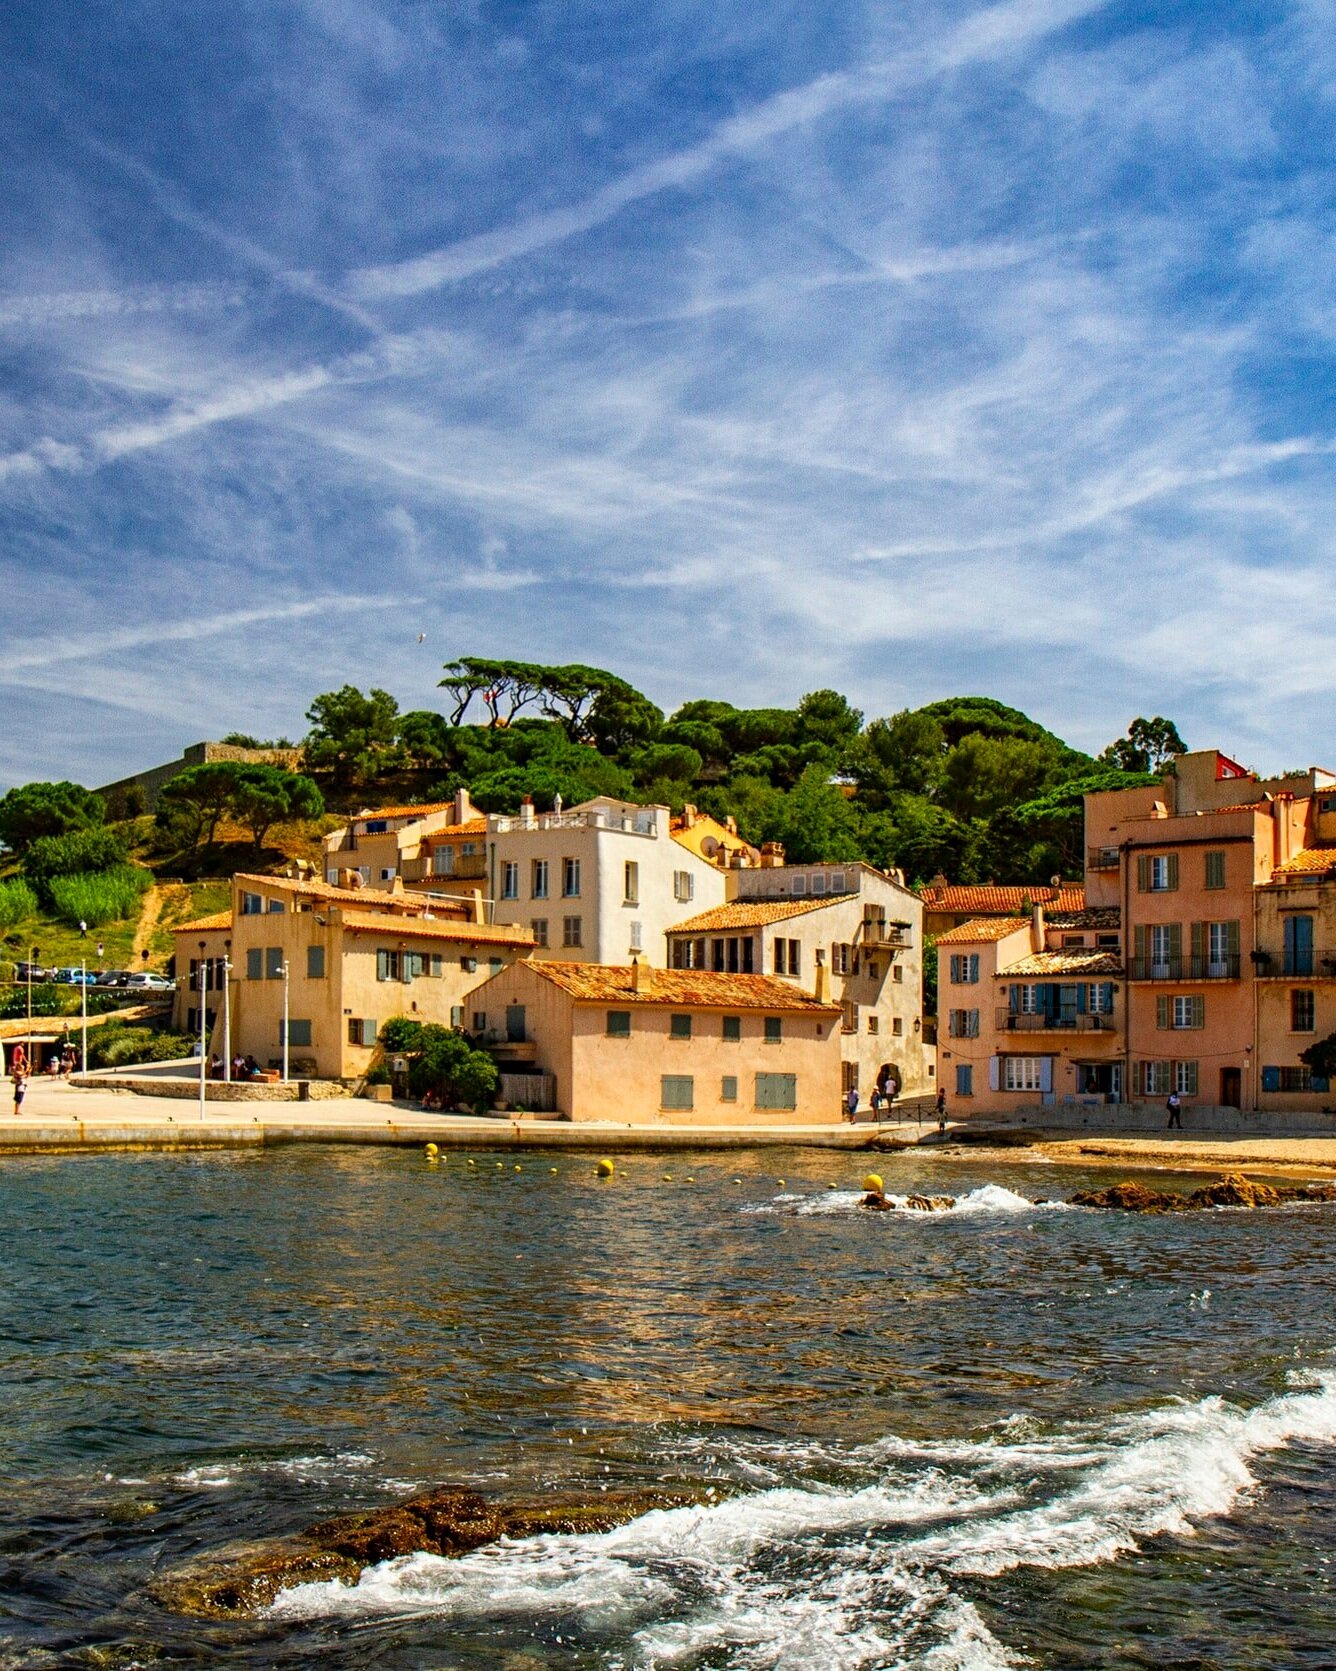 Saint-Tropez seminar and guided group tour